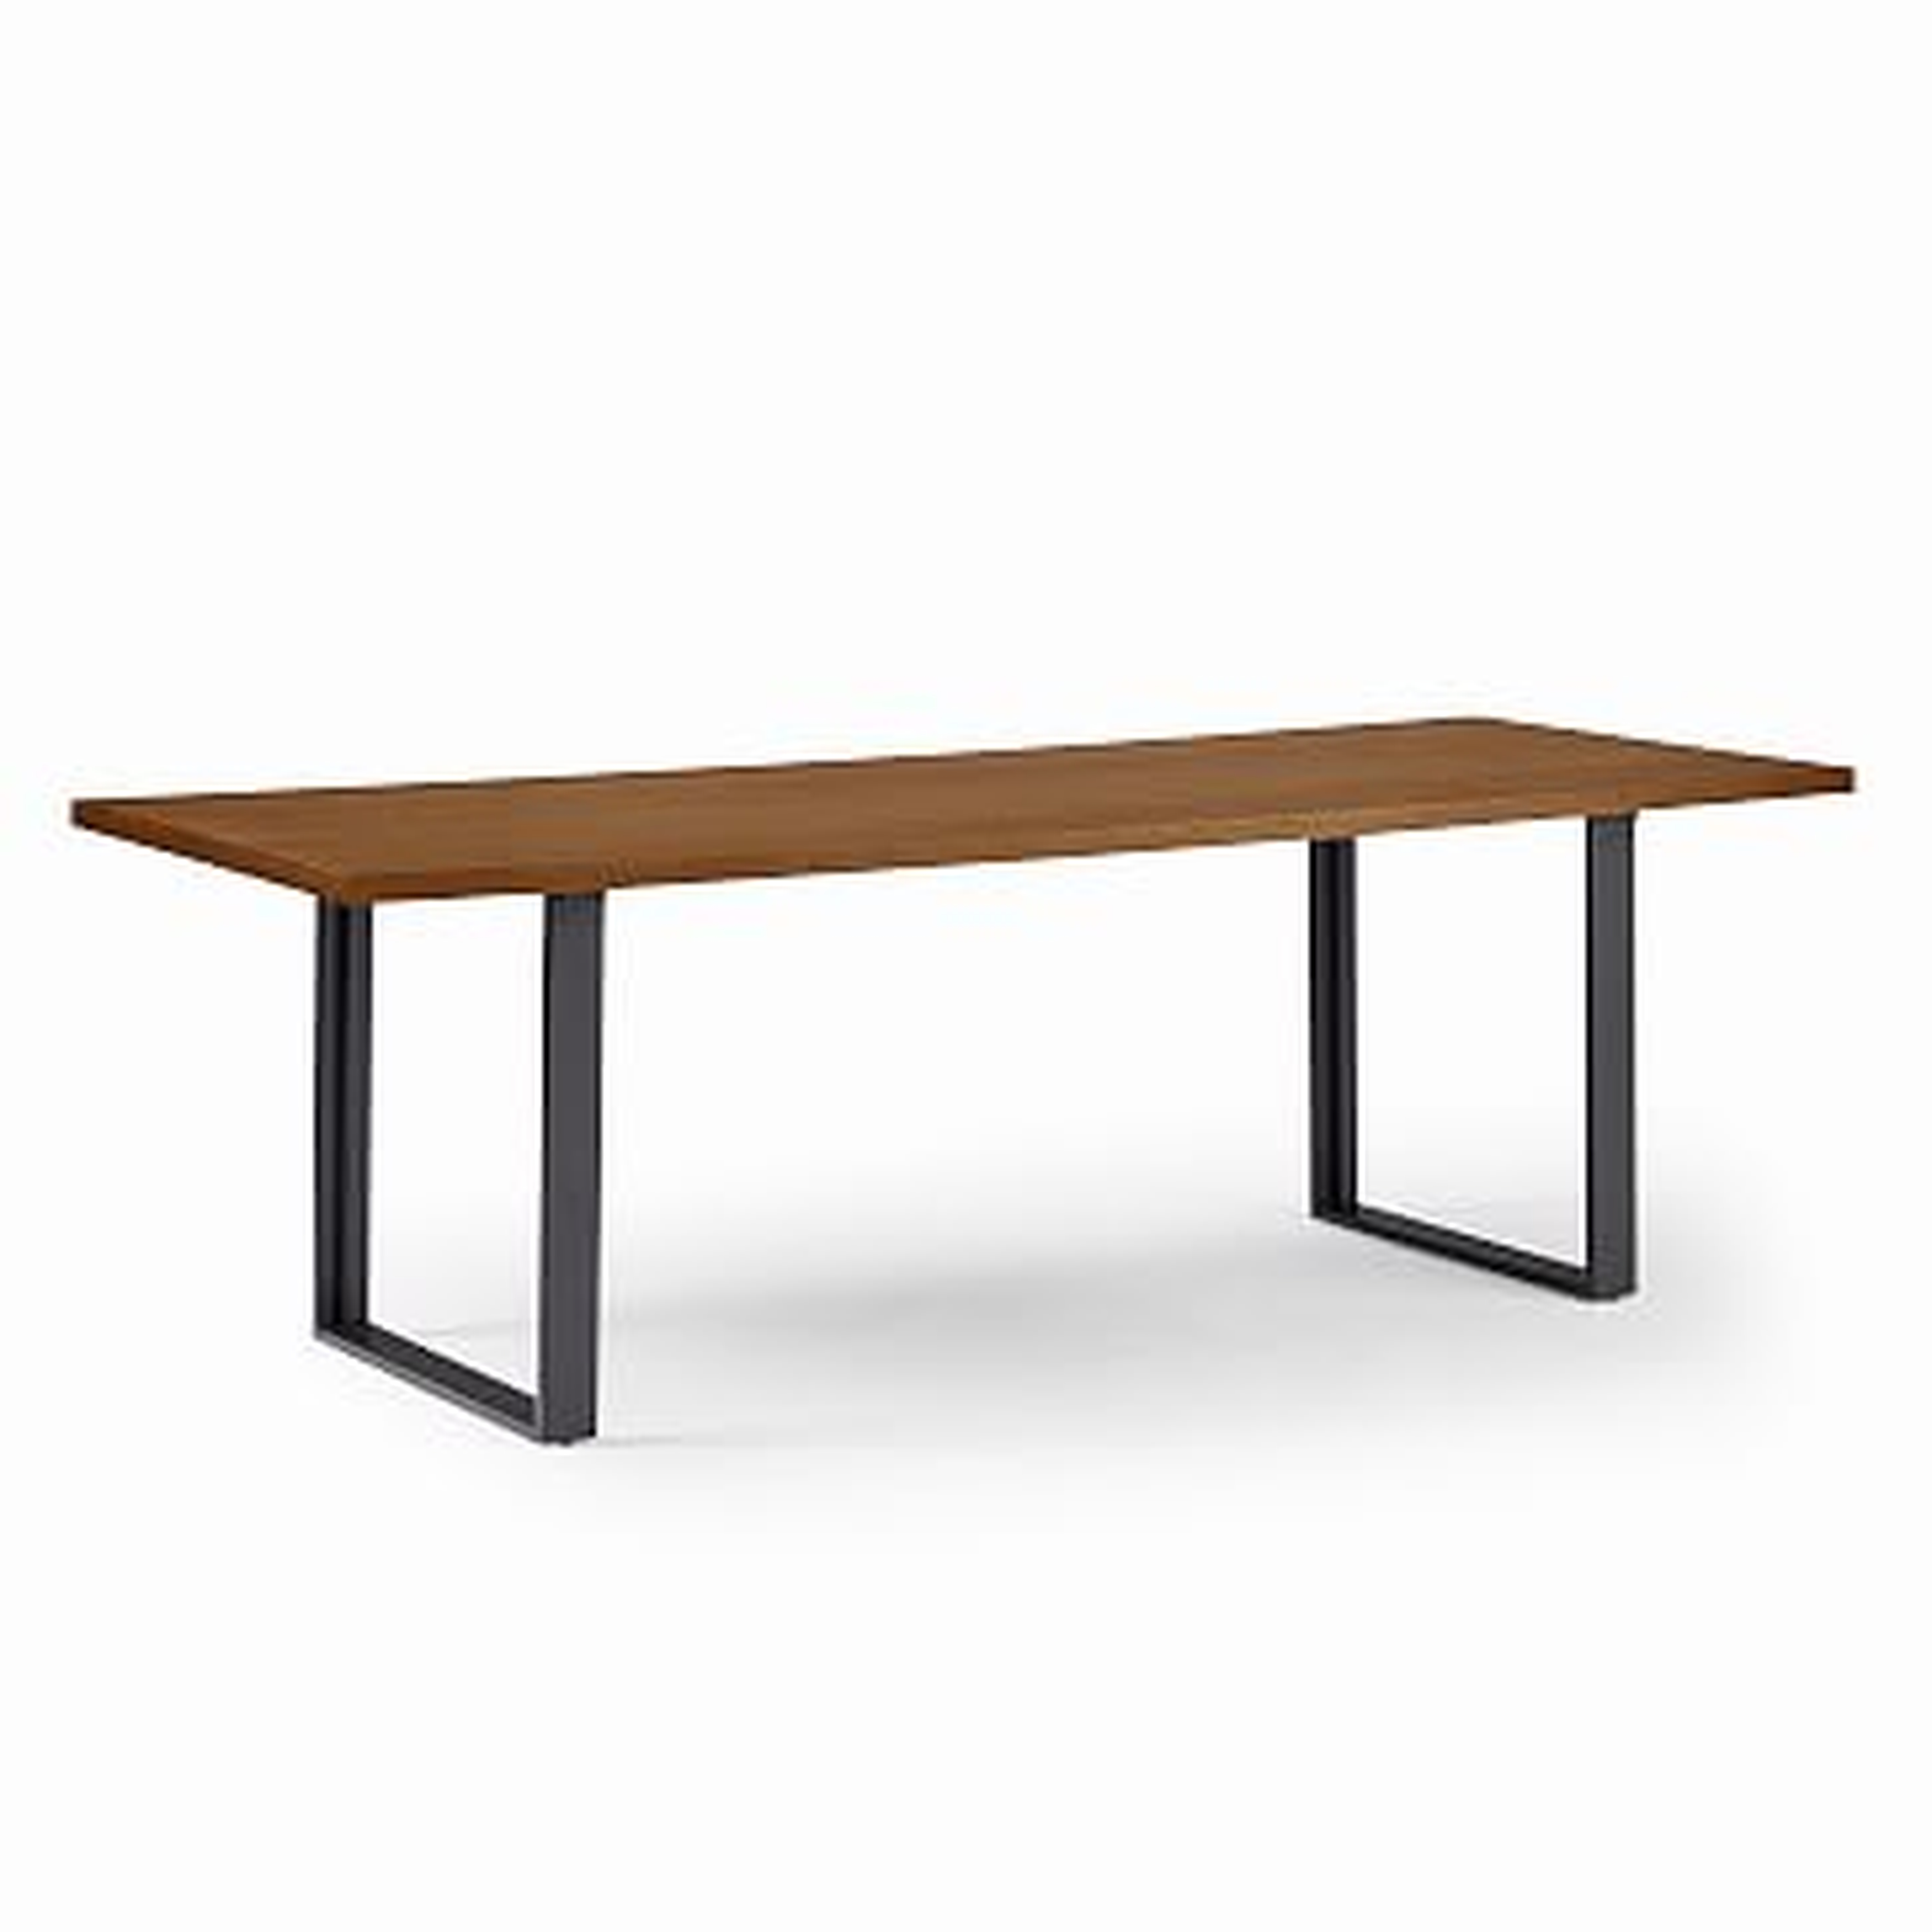 Avery 94" Industrial Dining Table, Cool Walnut, Antique Bronze - West Elm